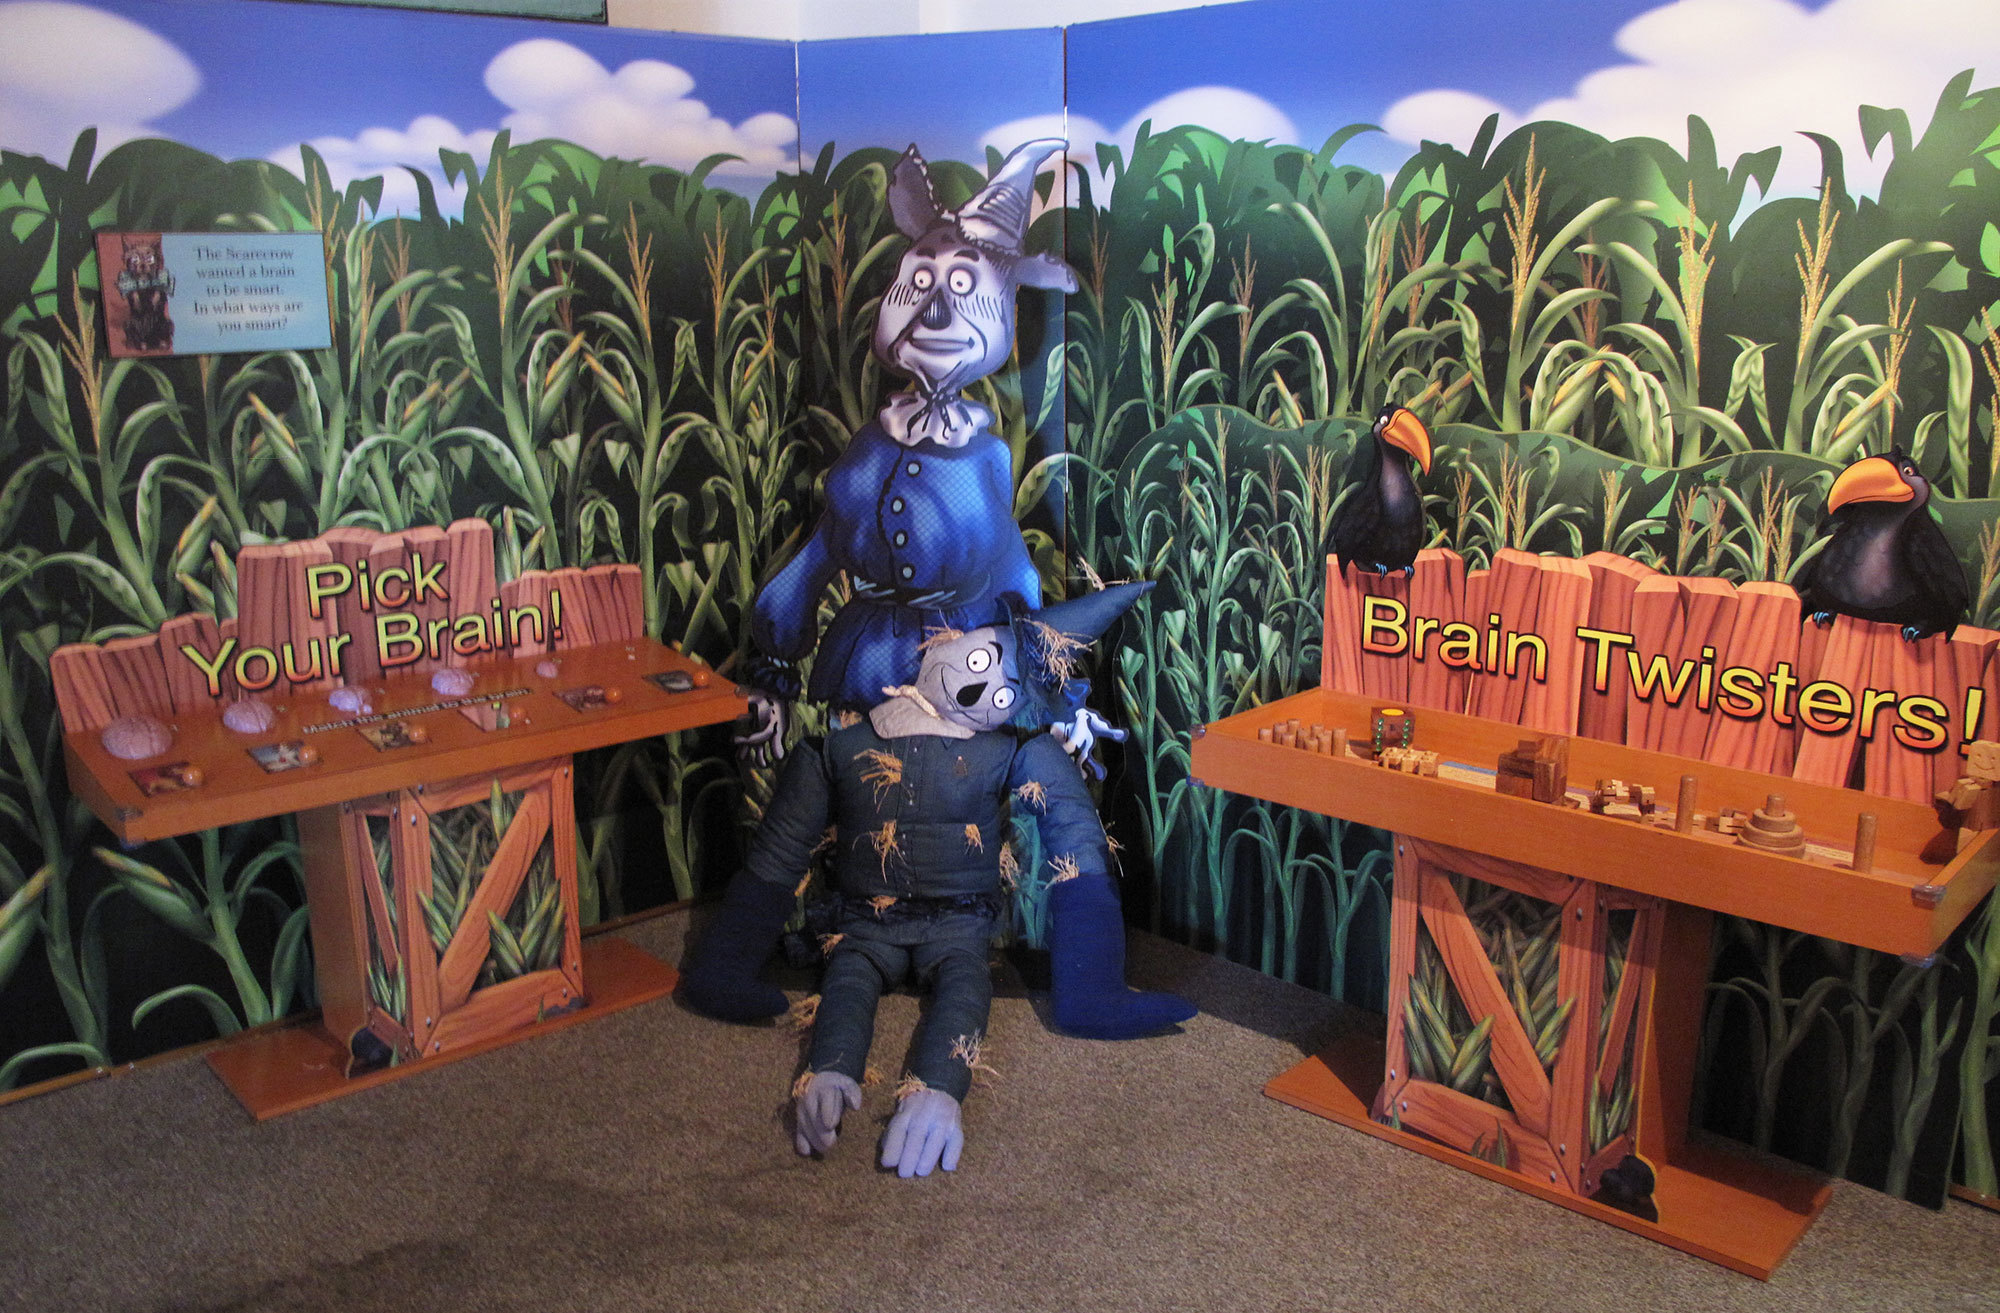 3D scarecrow with cornfield mural background and 3D interactive kiosks at Wizard of Oz Interactive Display at Great Explorations Museum